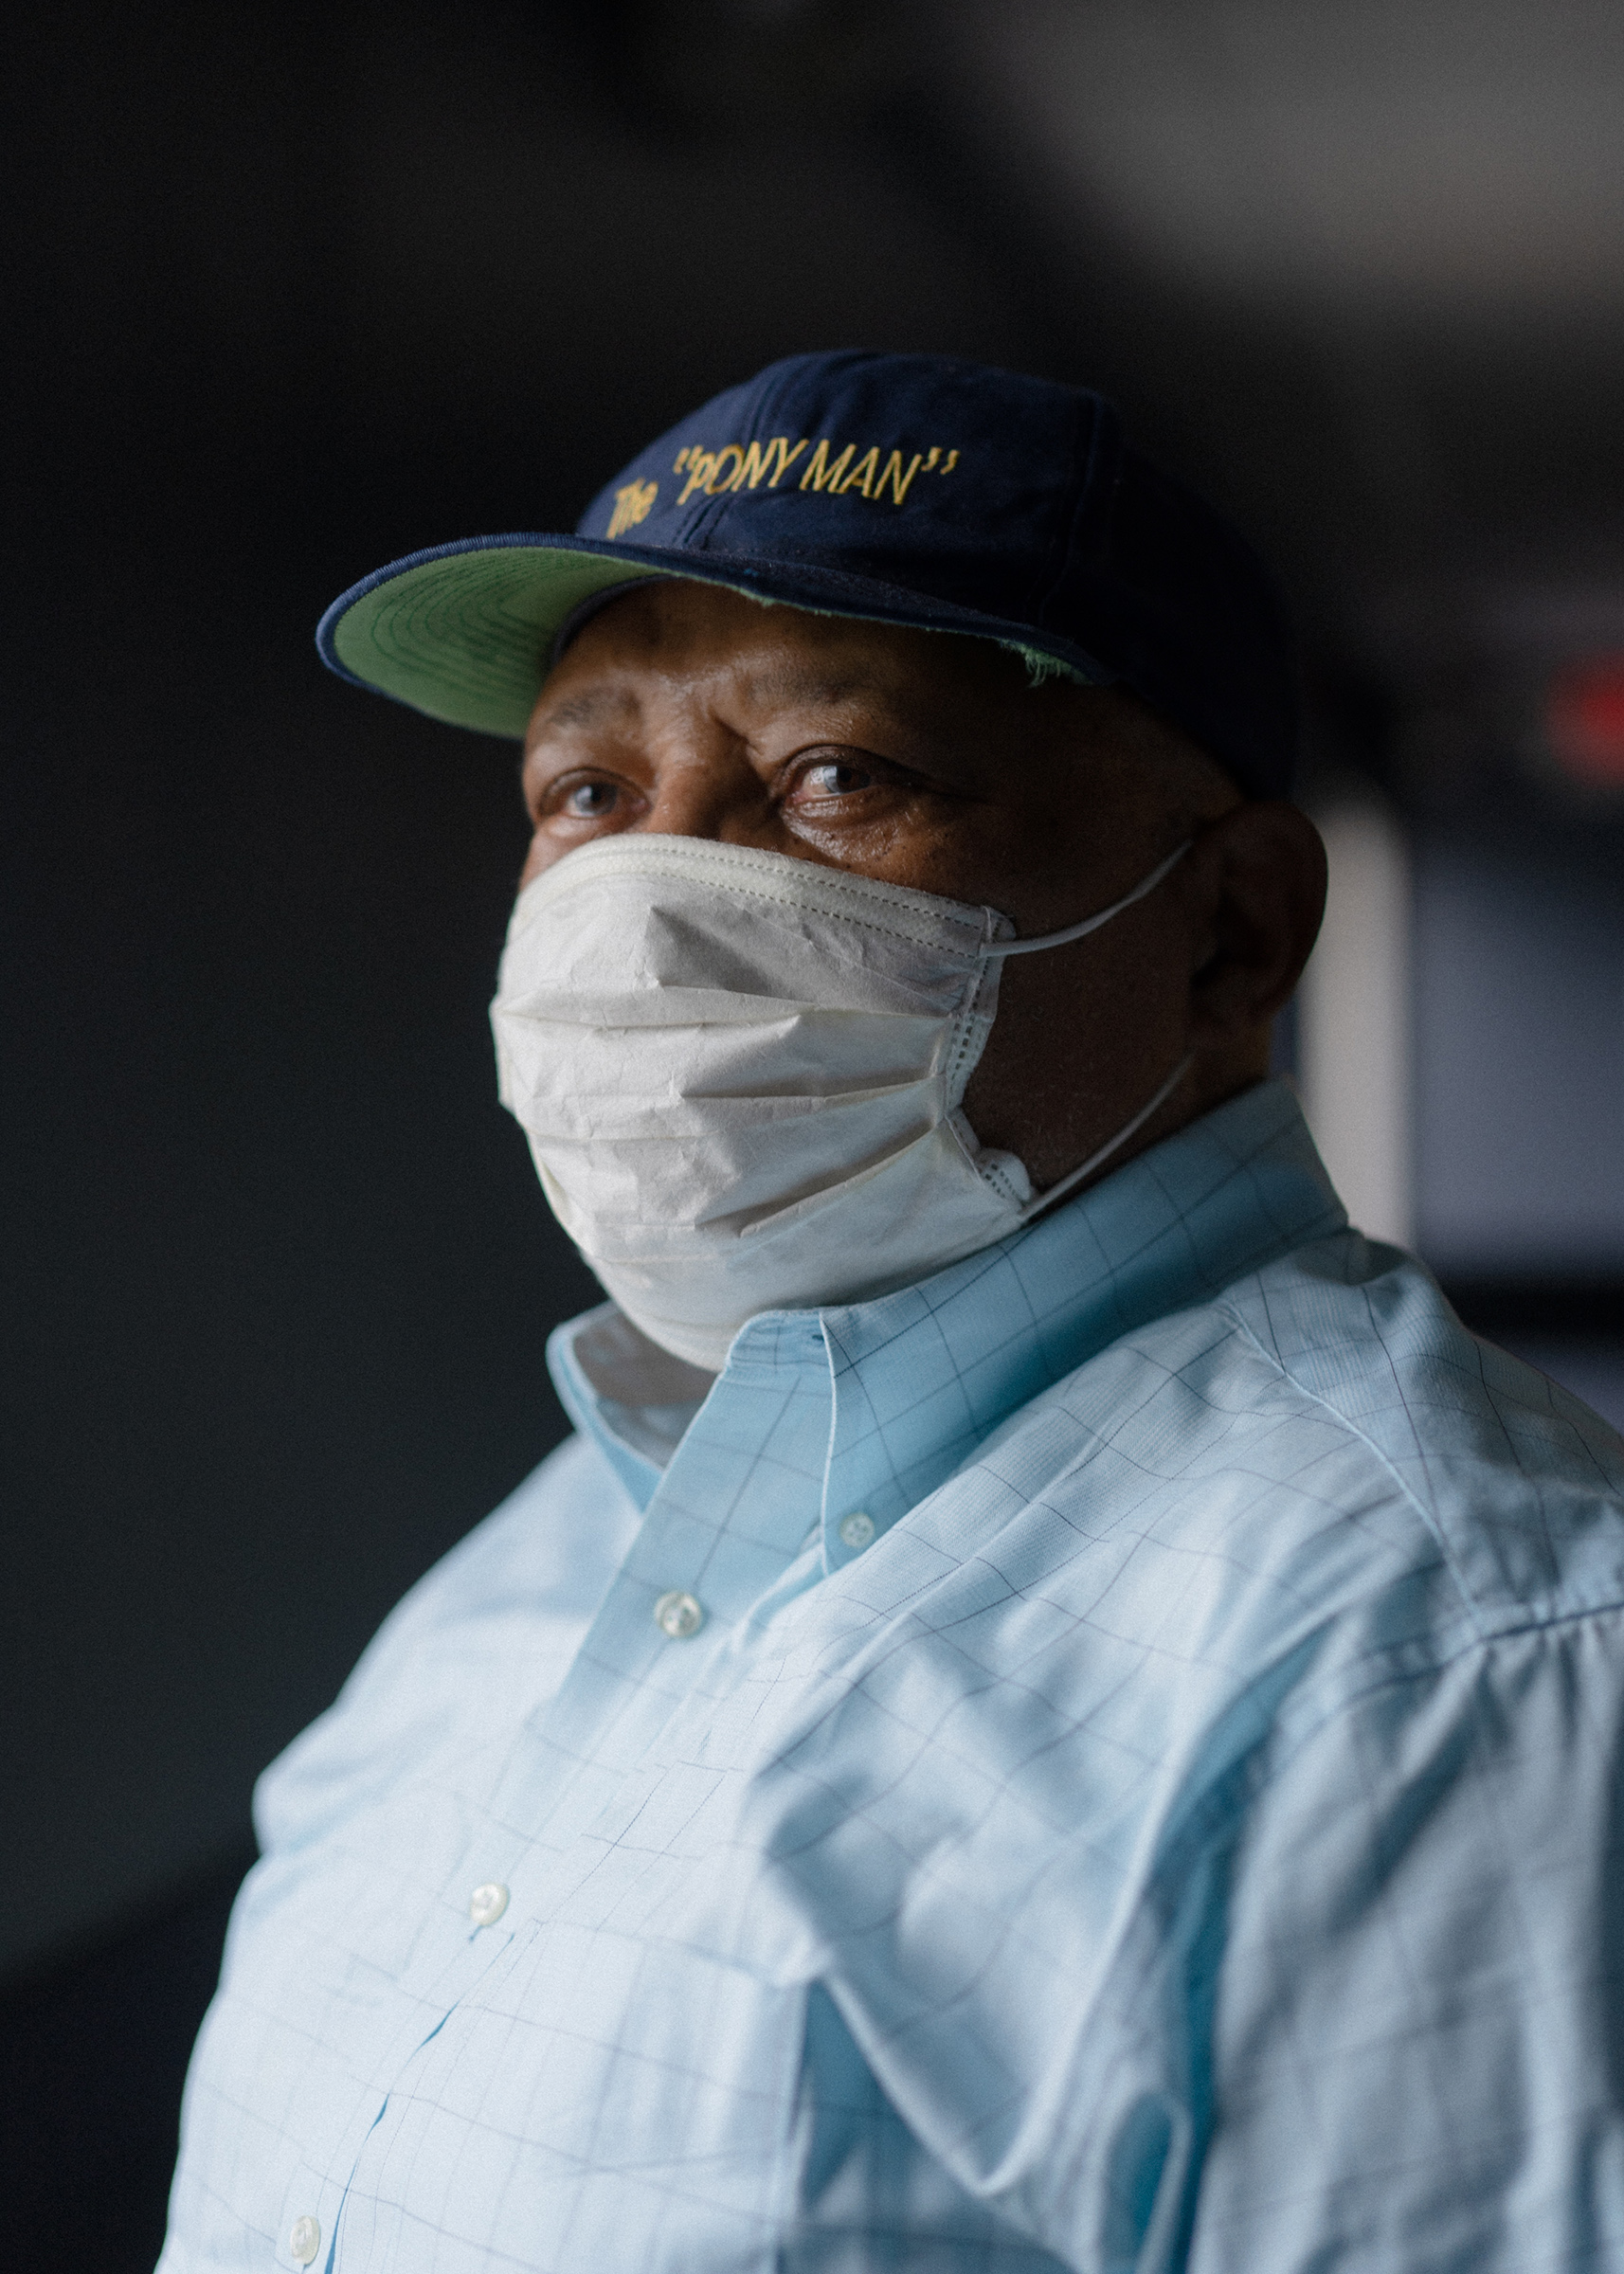 Retired Sanitation Worker, Mr. Maurice "Pony Man" Queen, 72, stands in the hallway of the Larry Hutchins Building at the DC Department of Public Works Solid Waste Collections Division in Northeast Washington, DC.